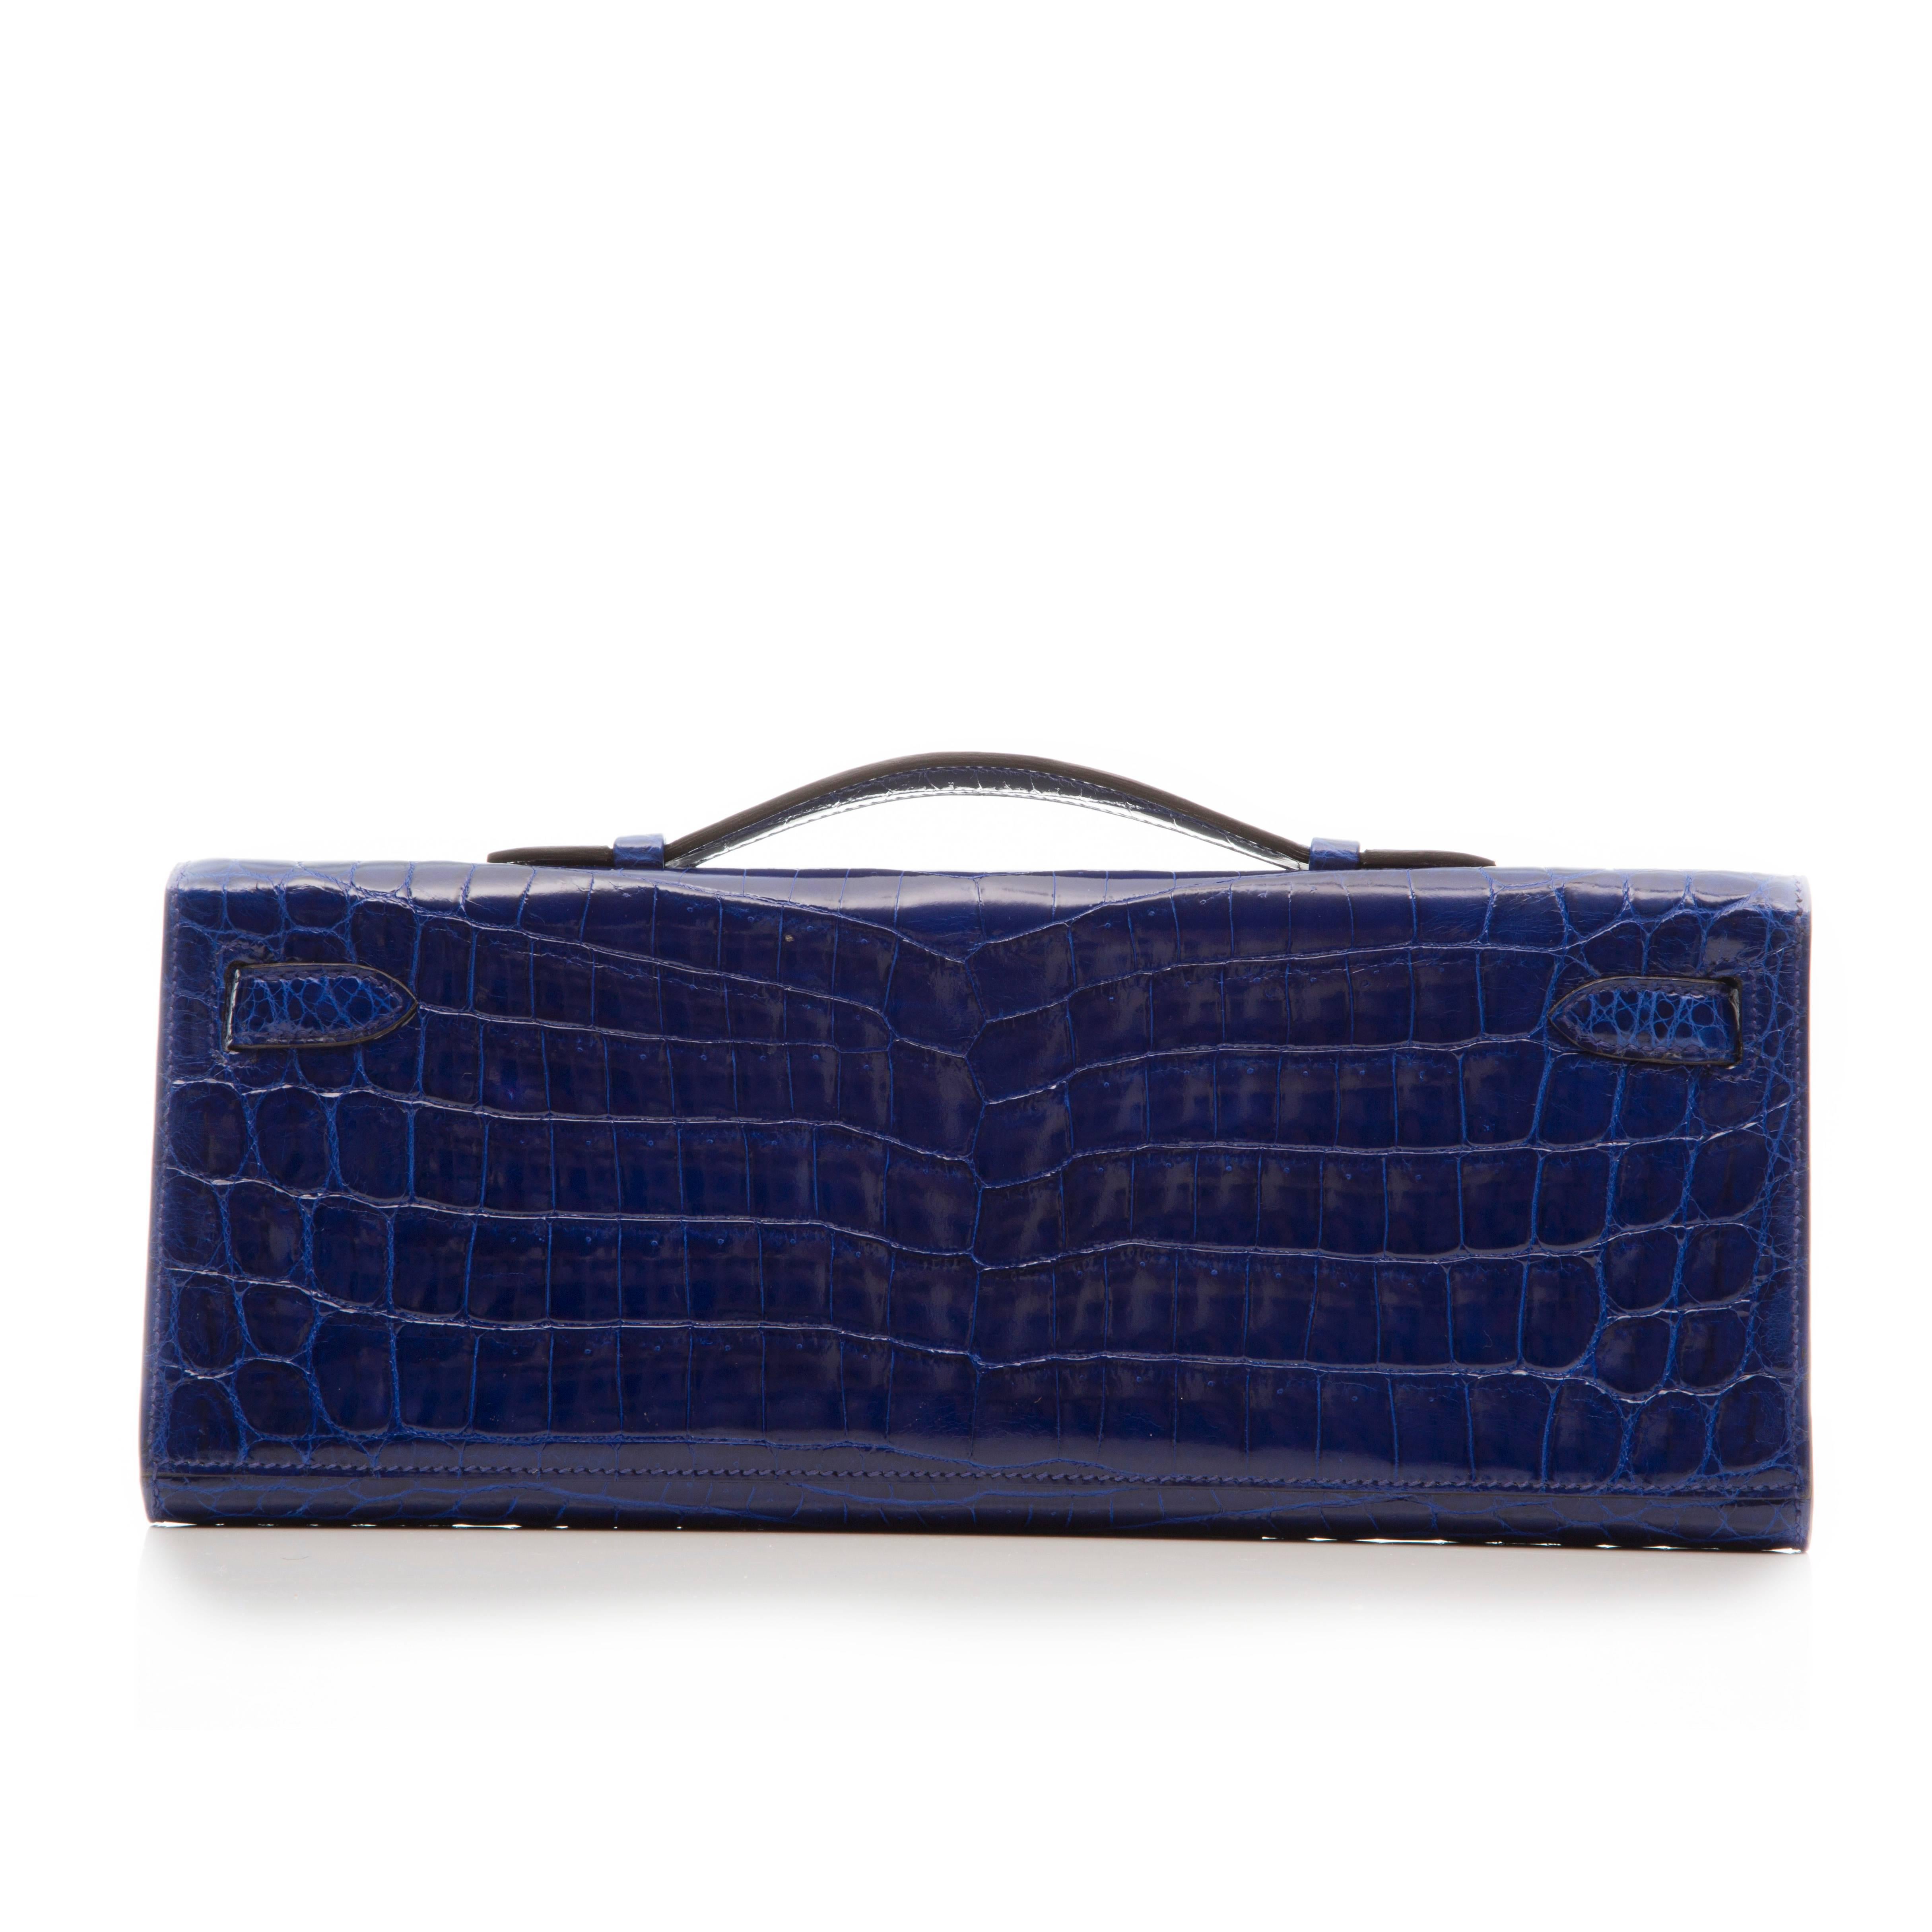 Crafted in Shiny Niloticus Crocodile with silver palladium hardware, this Electric Blue Kelly Cut clutch by Hermes features tonal stitching, front straps with toggle closure and a top flat handle. The interior is lined in matching Electric Blue